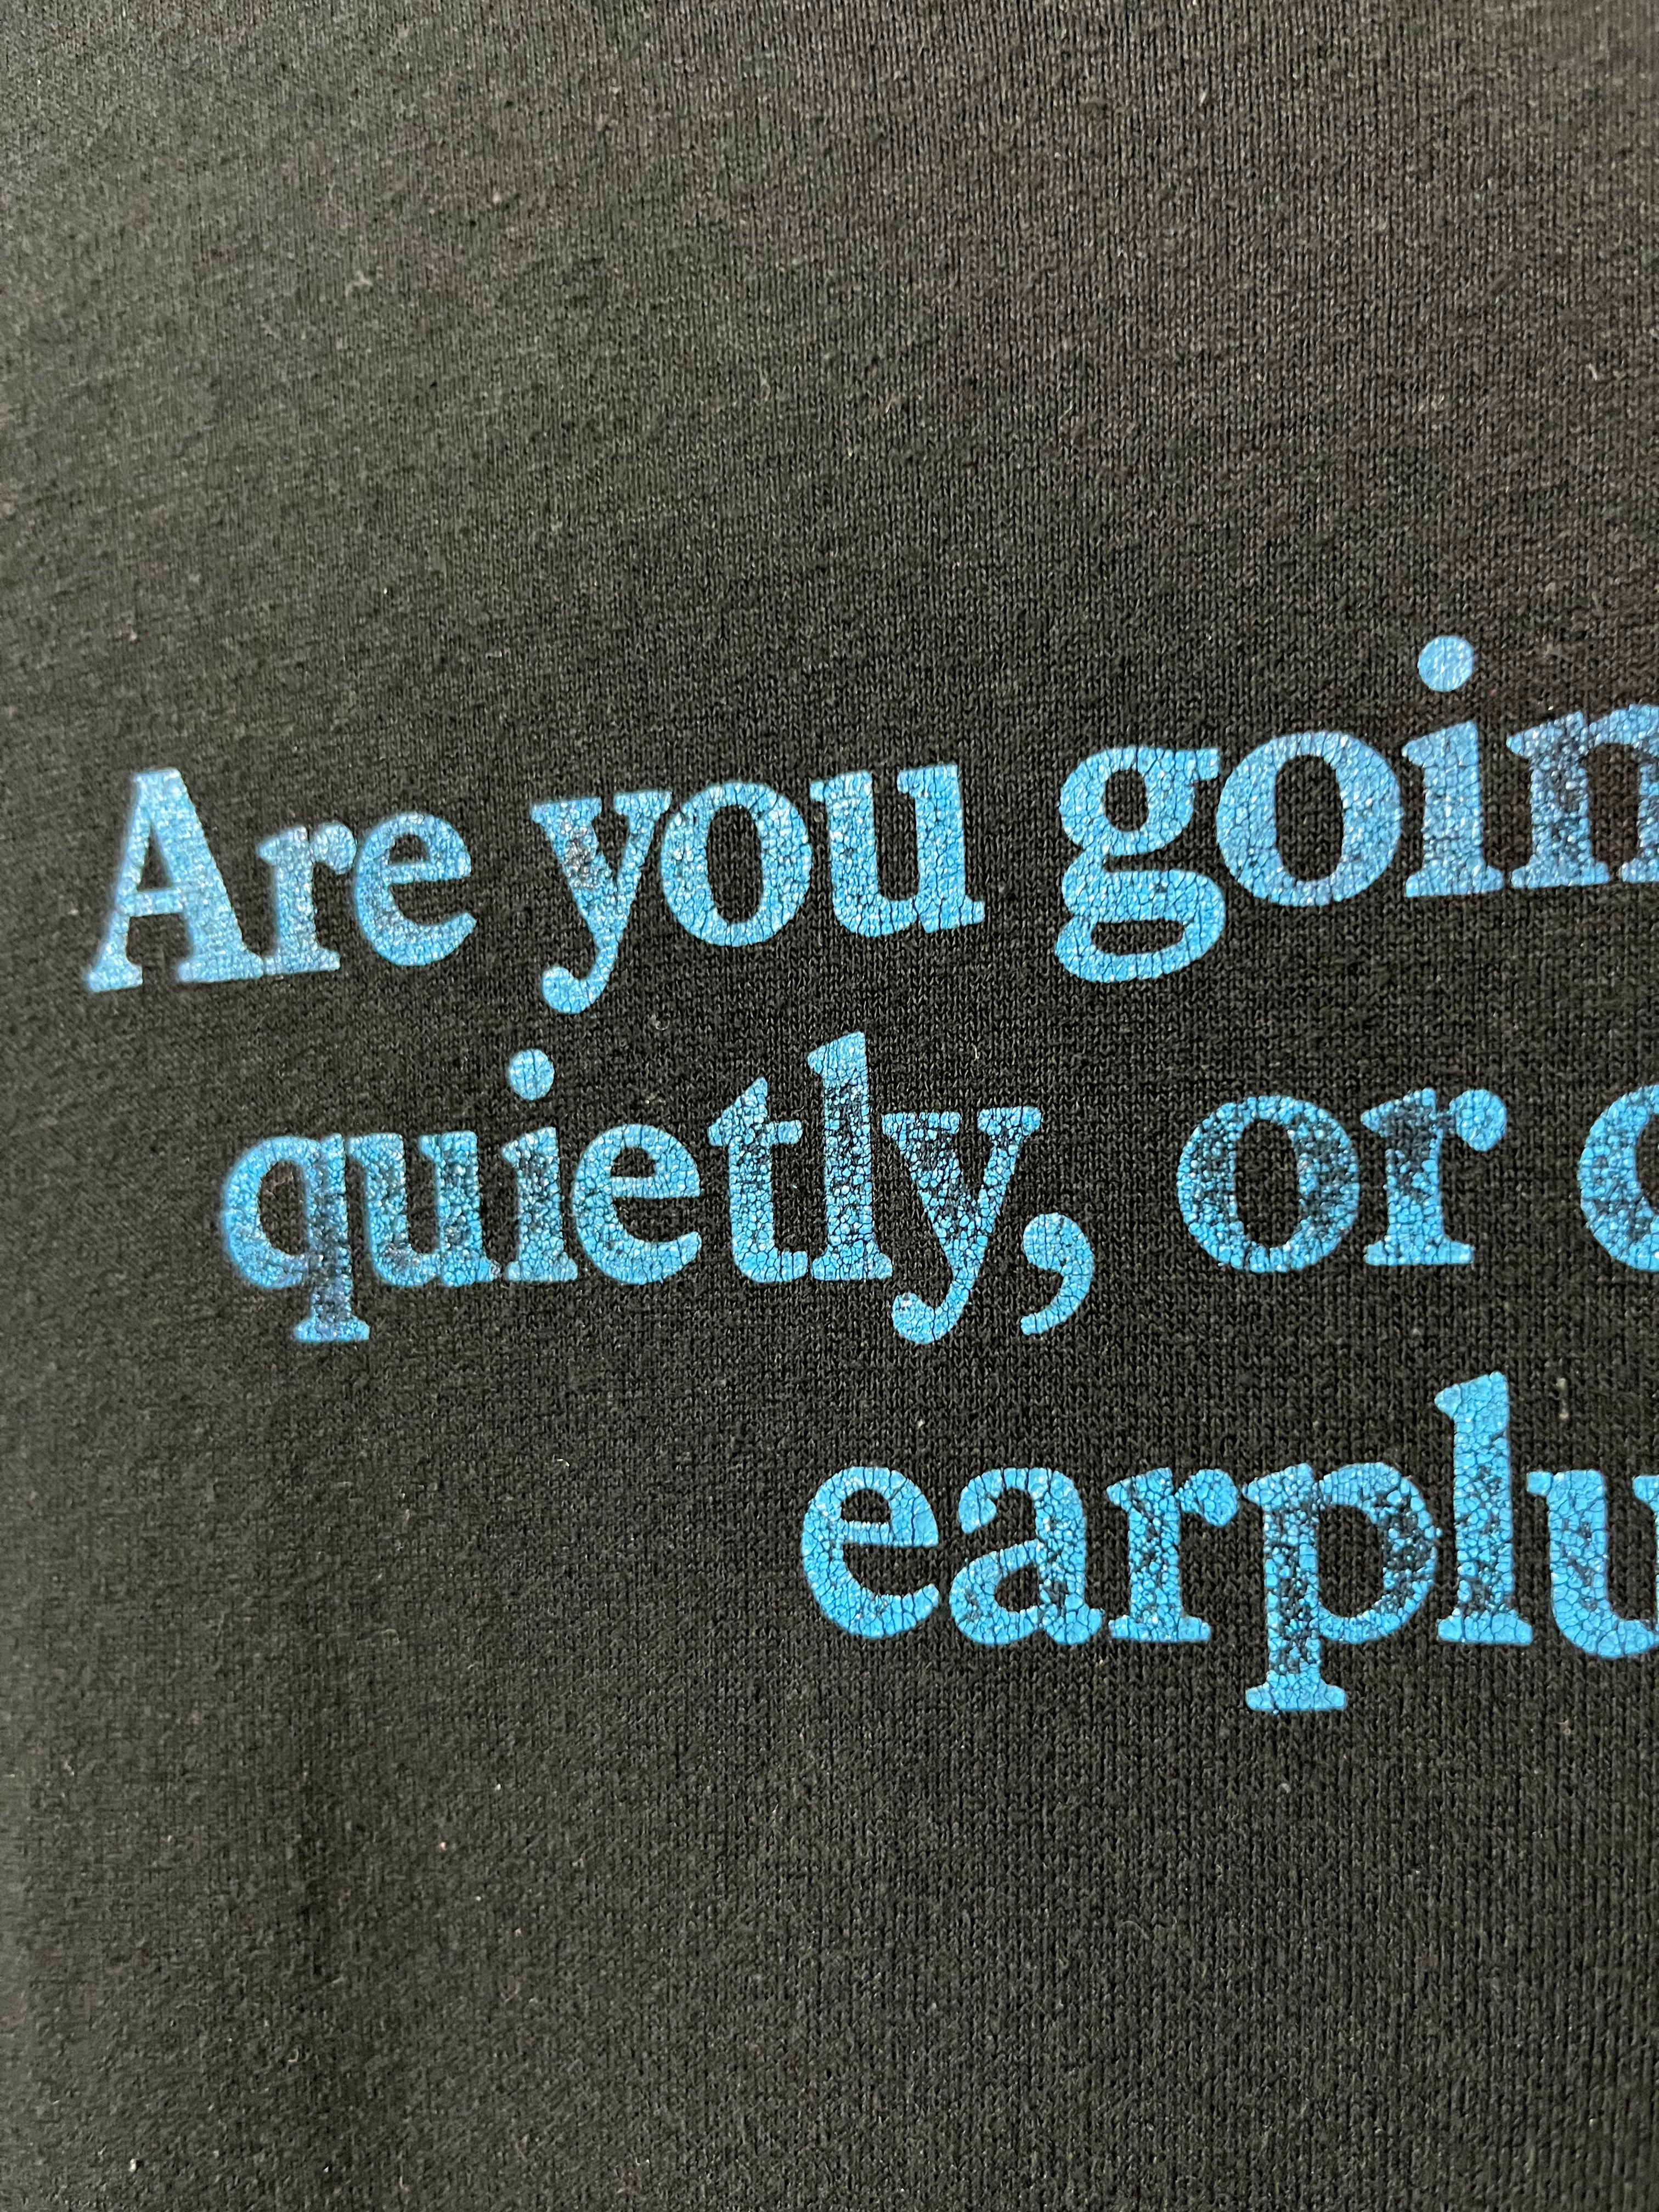 Early 90s ‘Are You Going to Come Quietly’ Novelty T-Shirt - Faded Black/Charcoal - L/XL